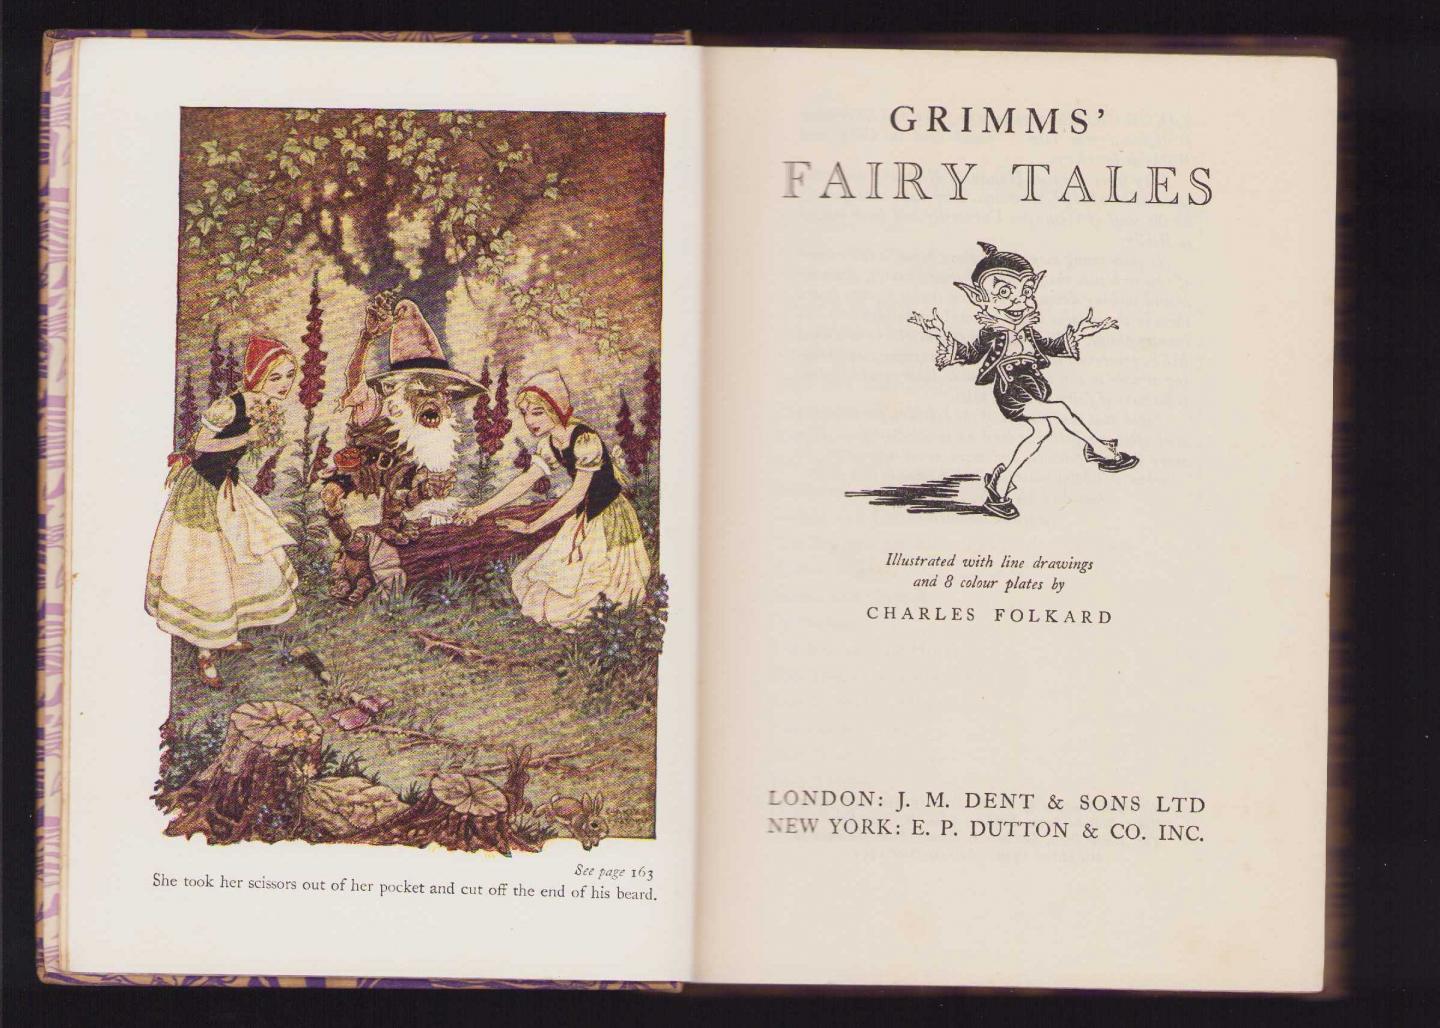 Grimm - Grimms' Fairy Tales